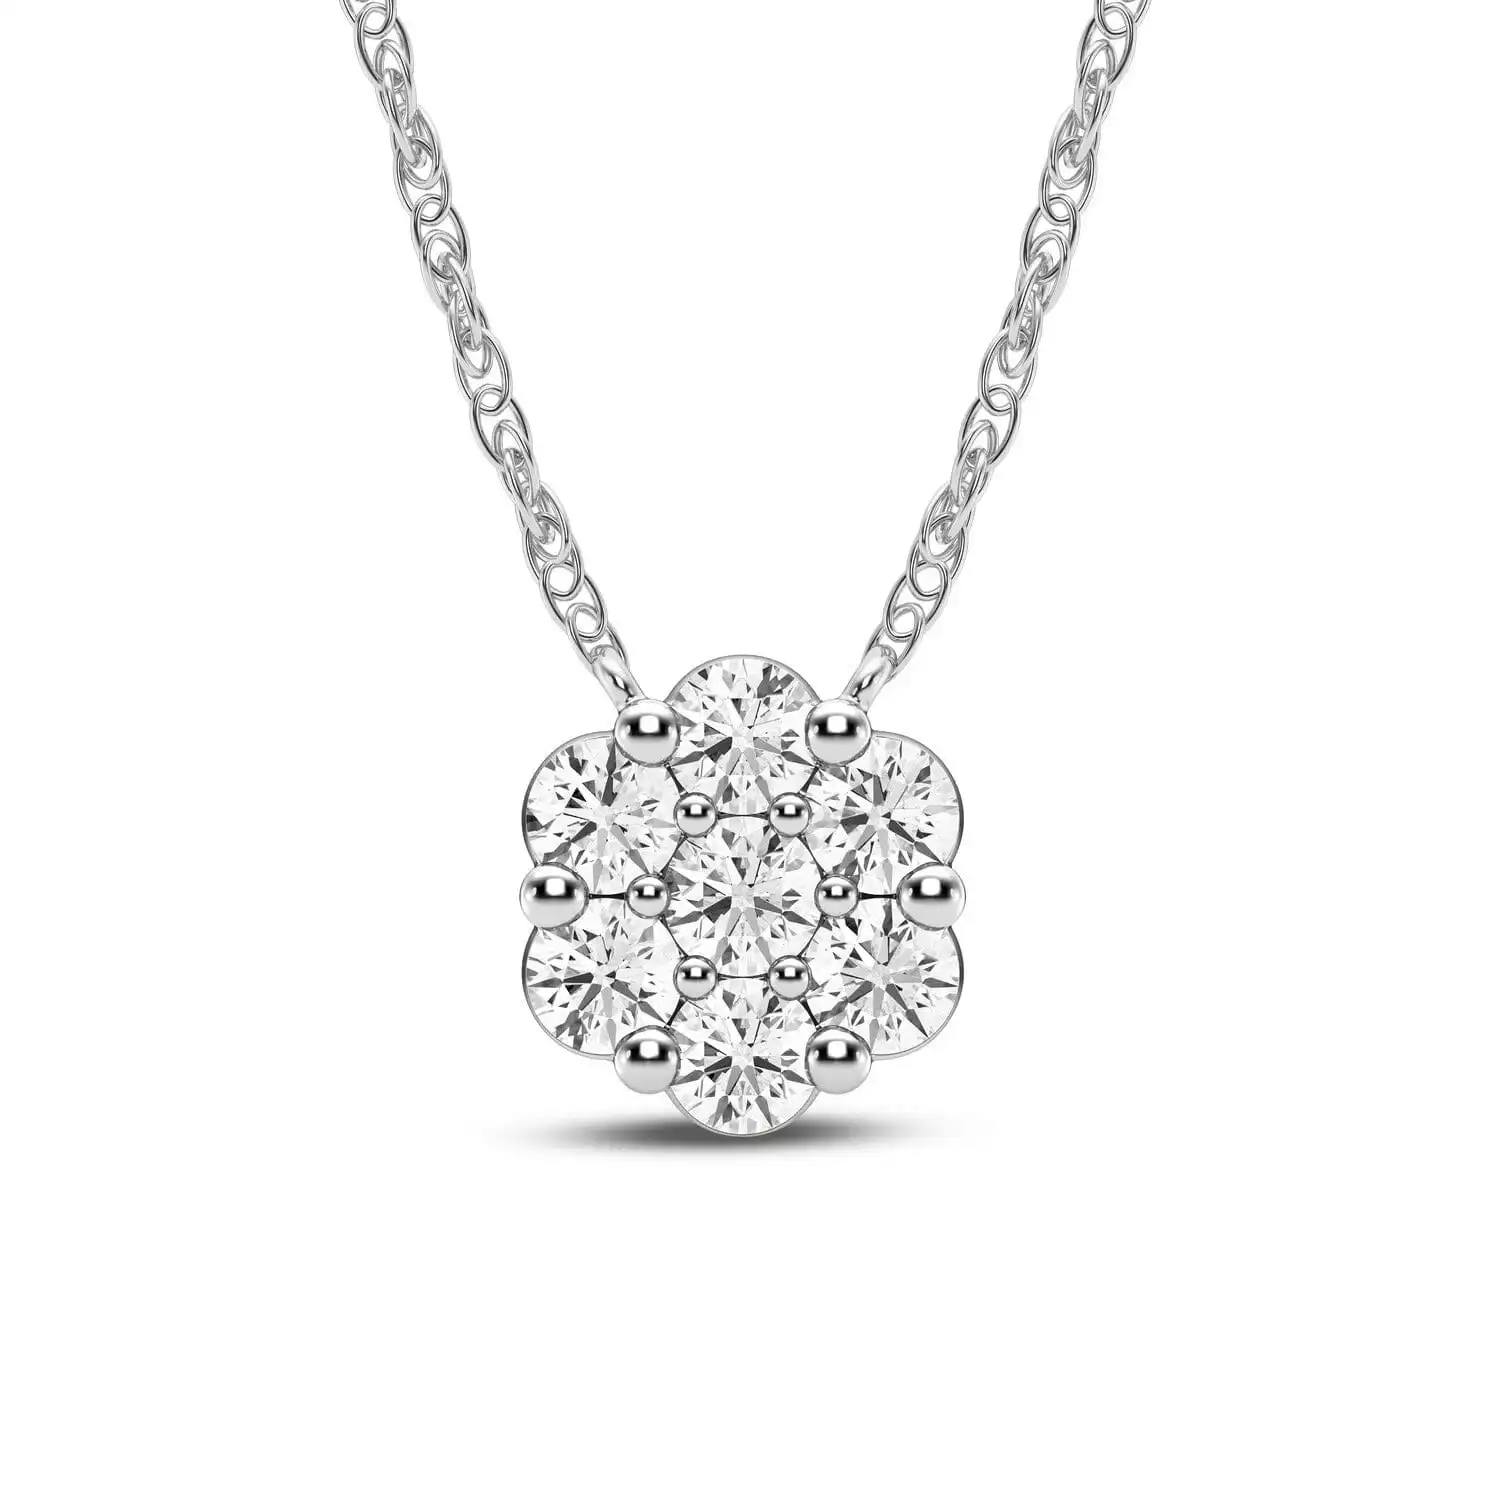 Meera Flower Necklace with 1/3ct of Laboratory Grown Diamonds in 9ct White Gold